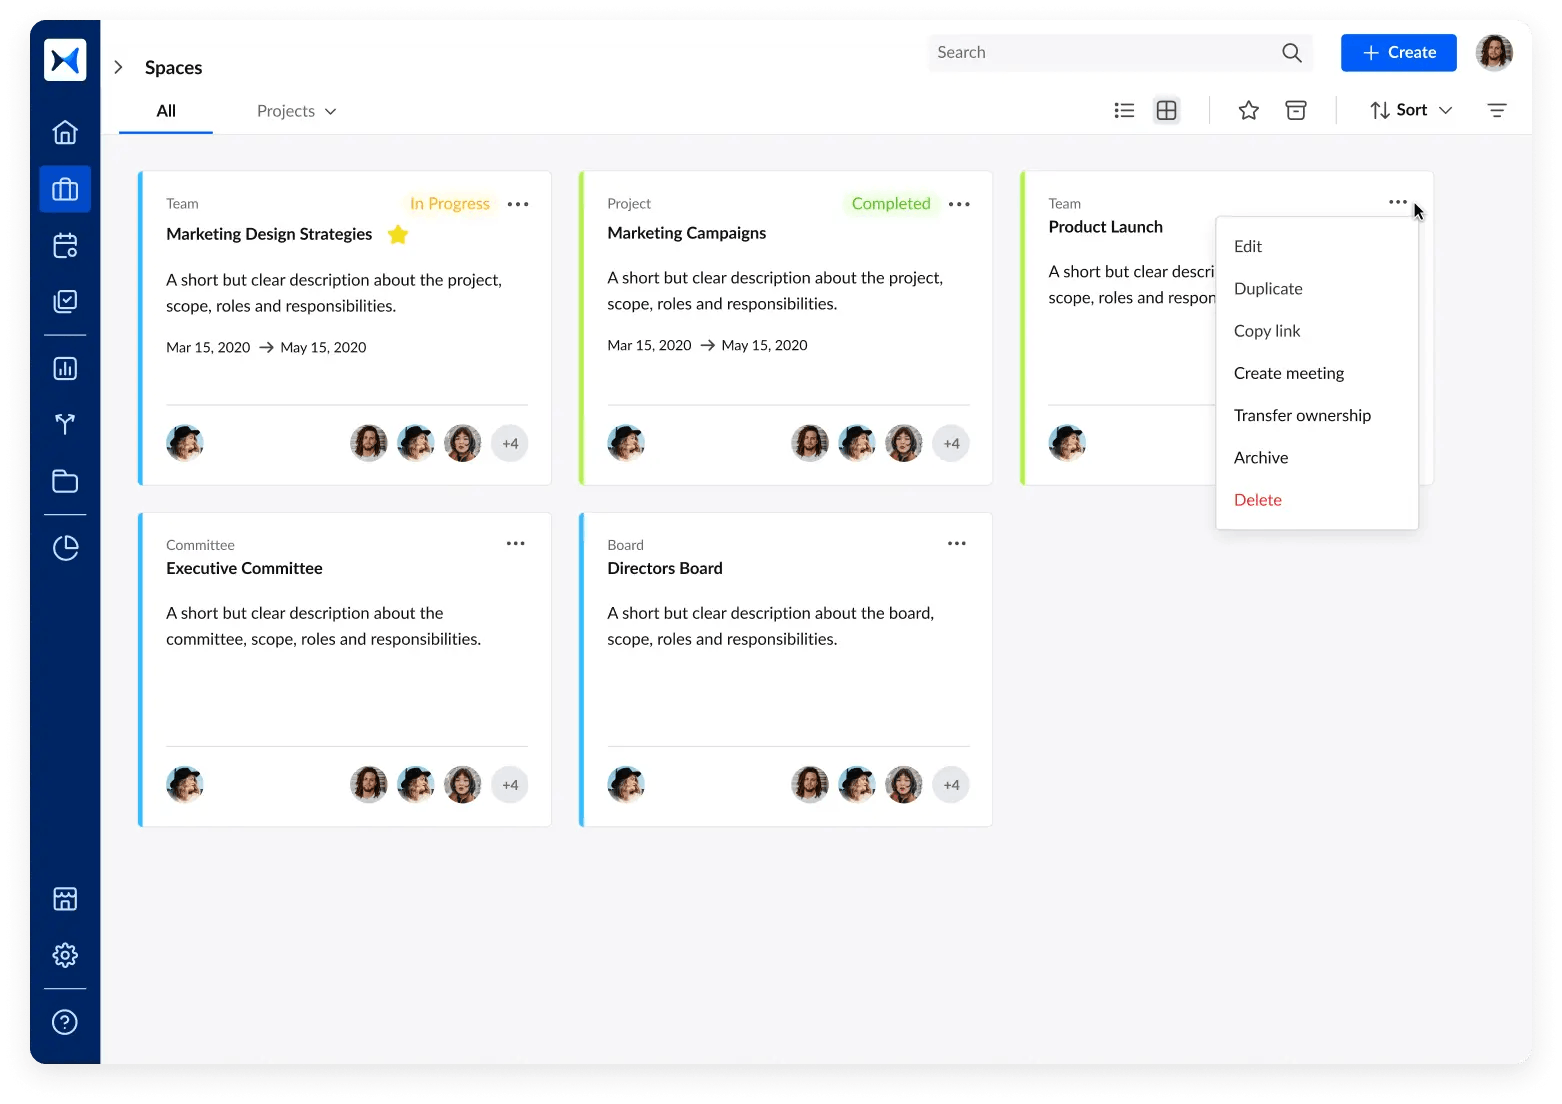 Meeting spaces for projects, teams, committees, and boards